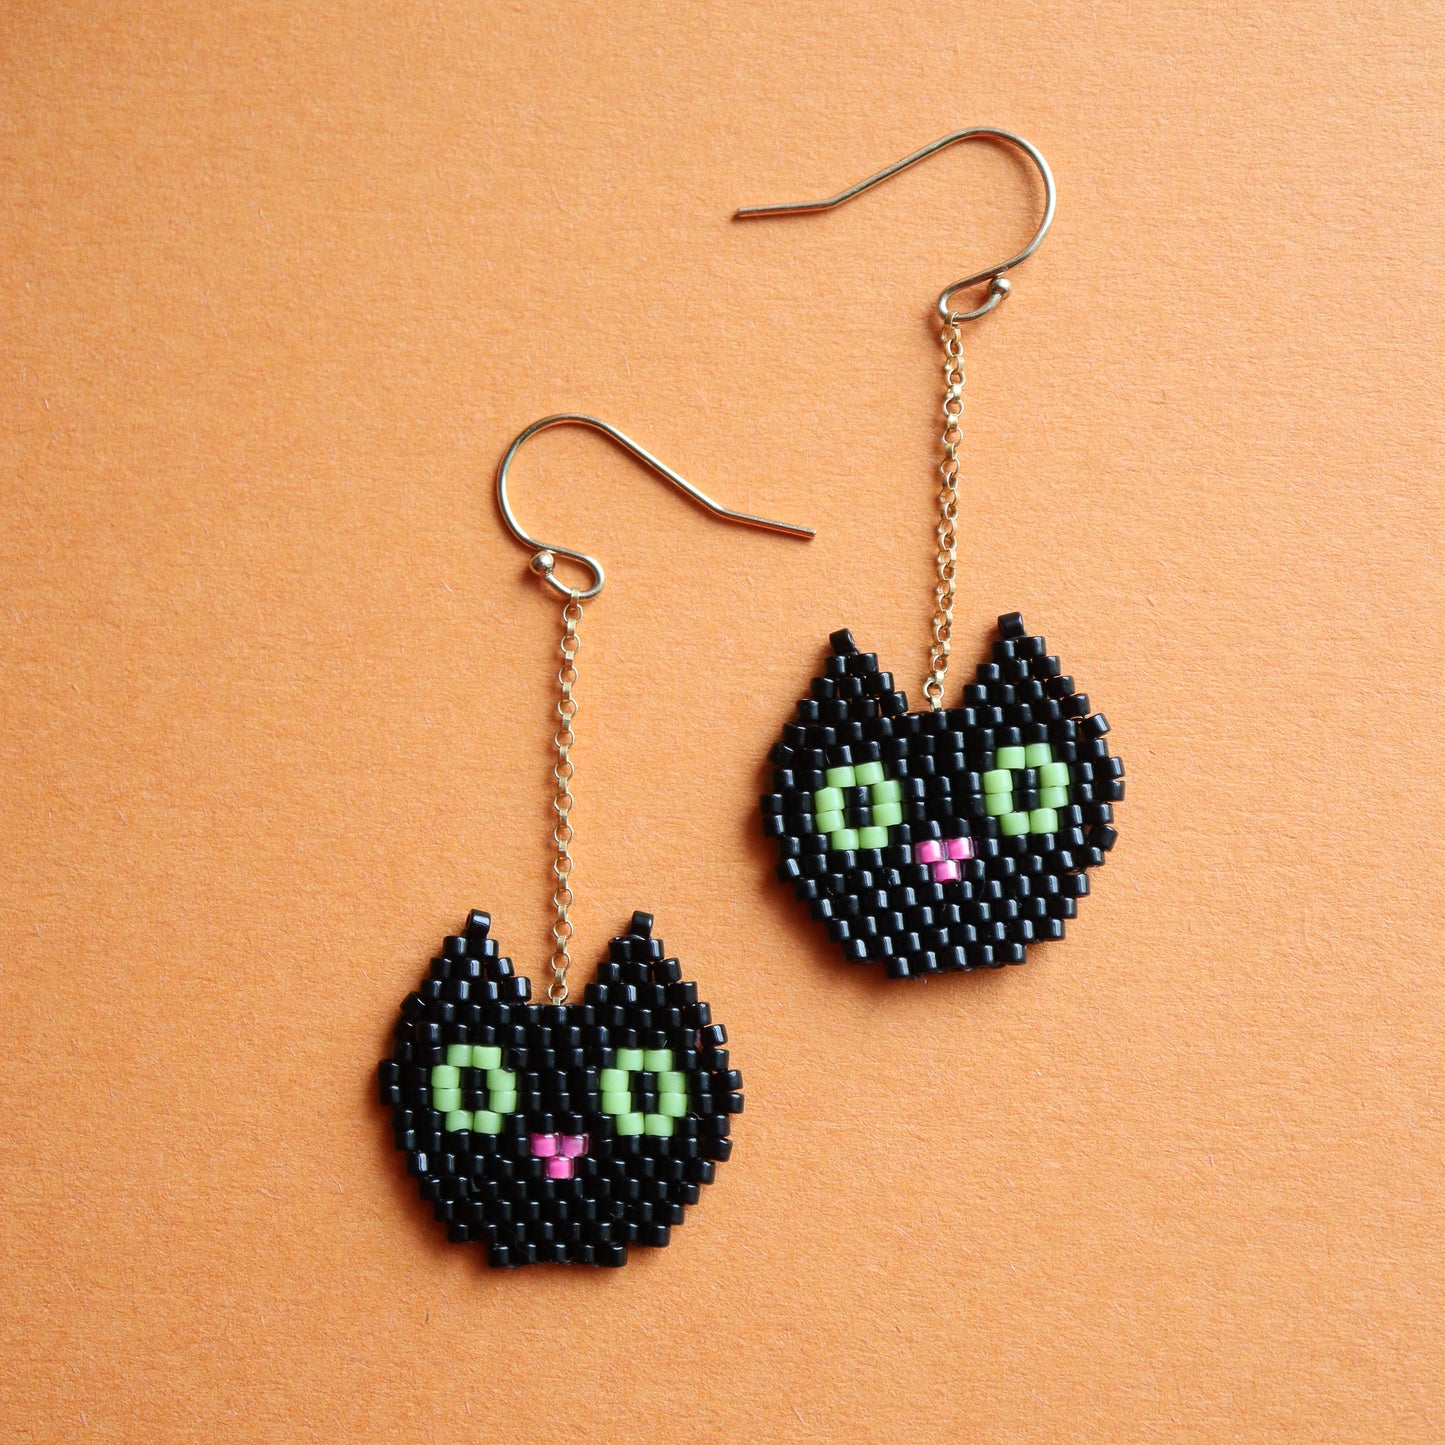 beaded earrings with black cat heads and green eyes